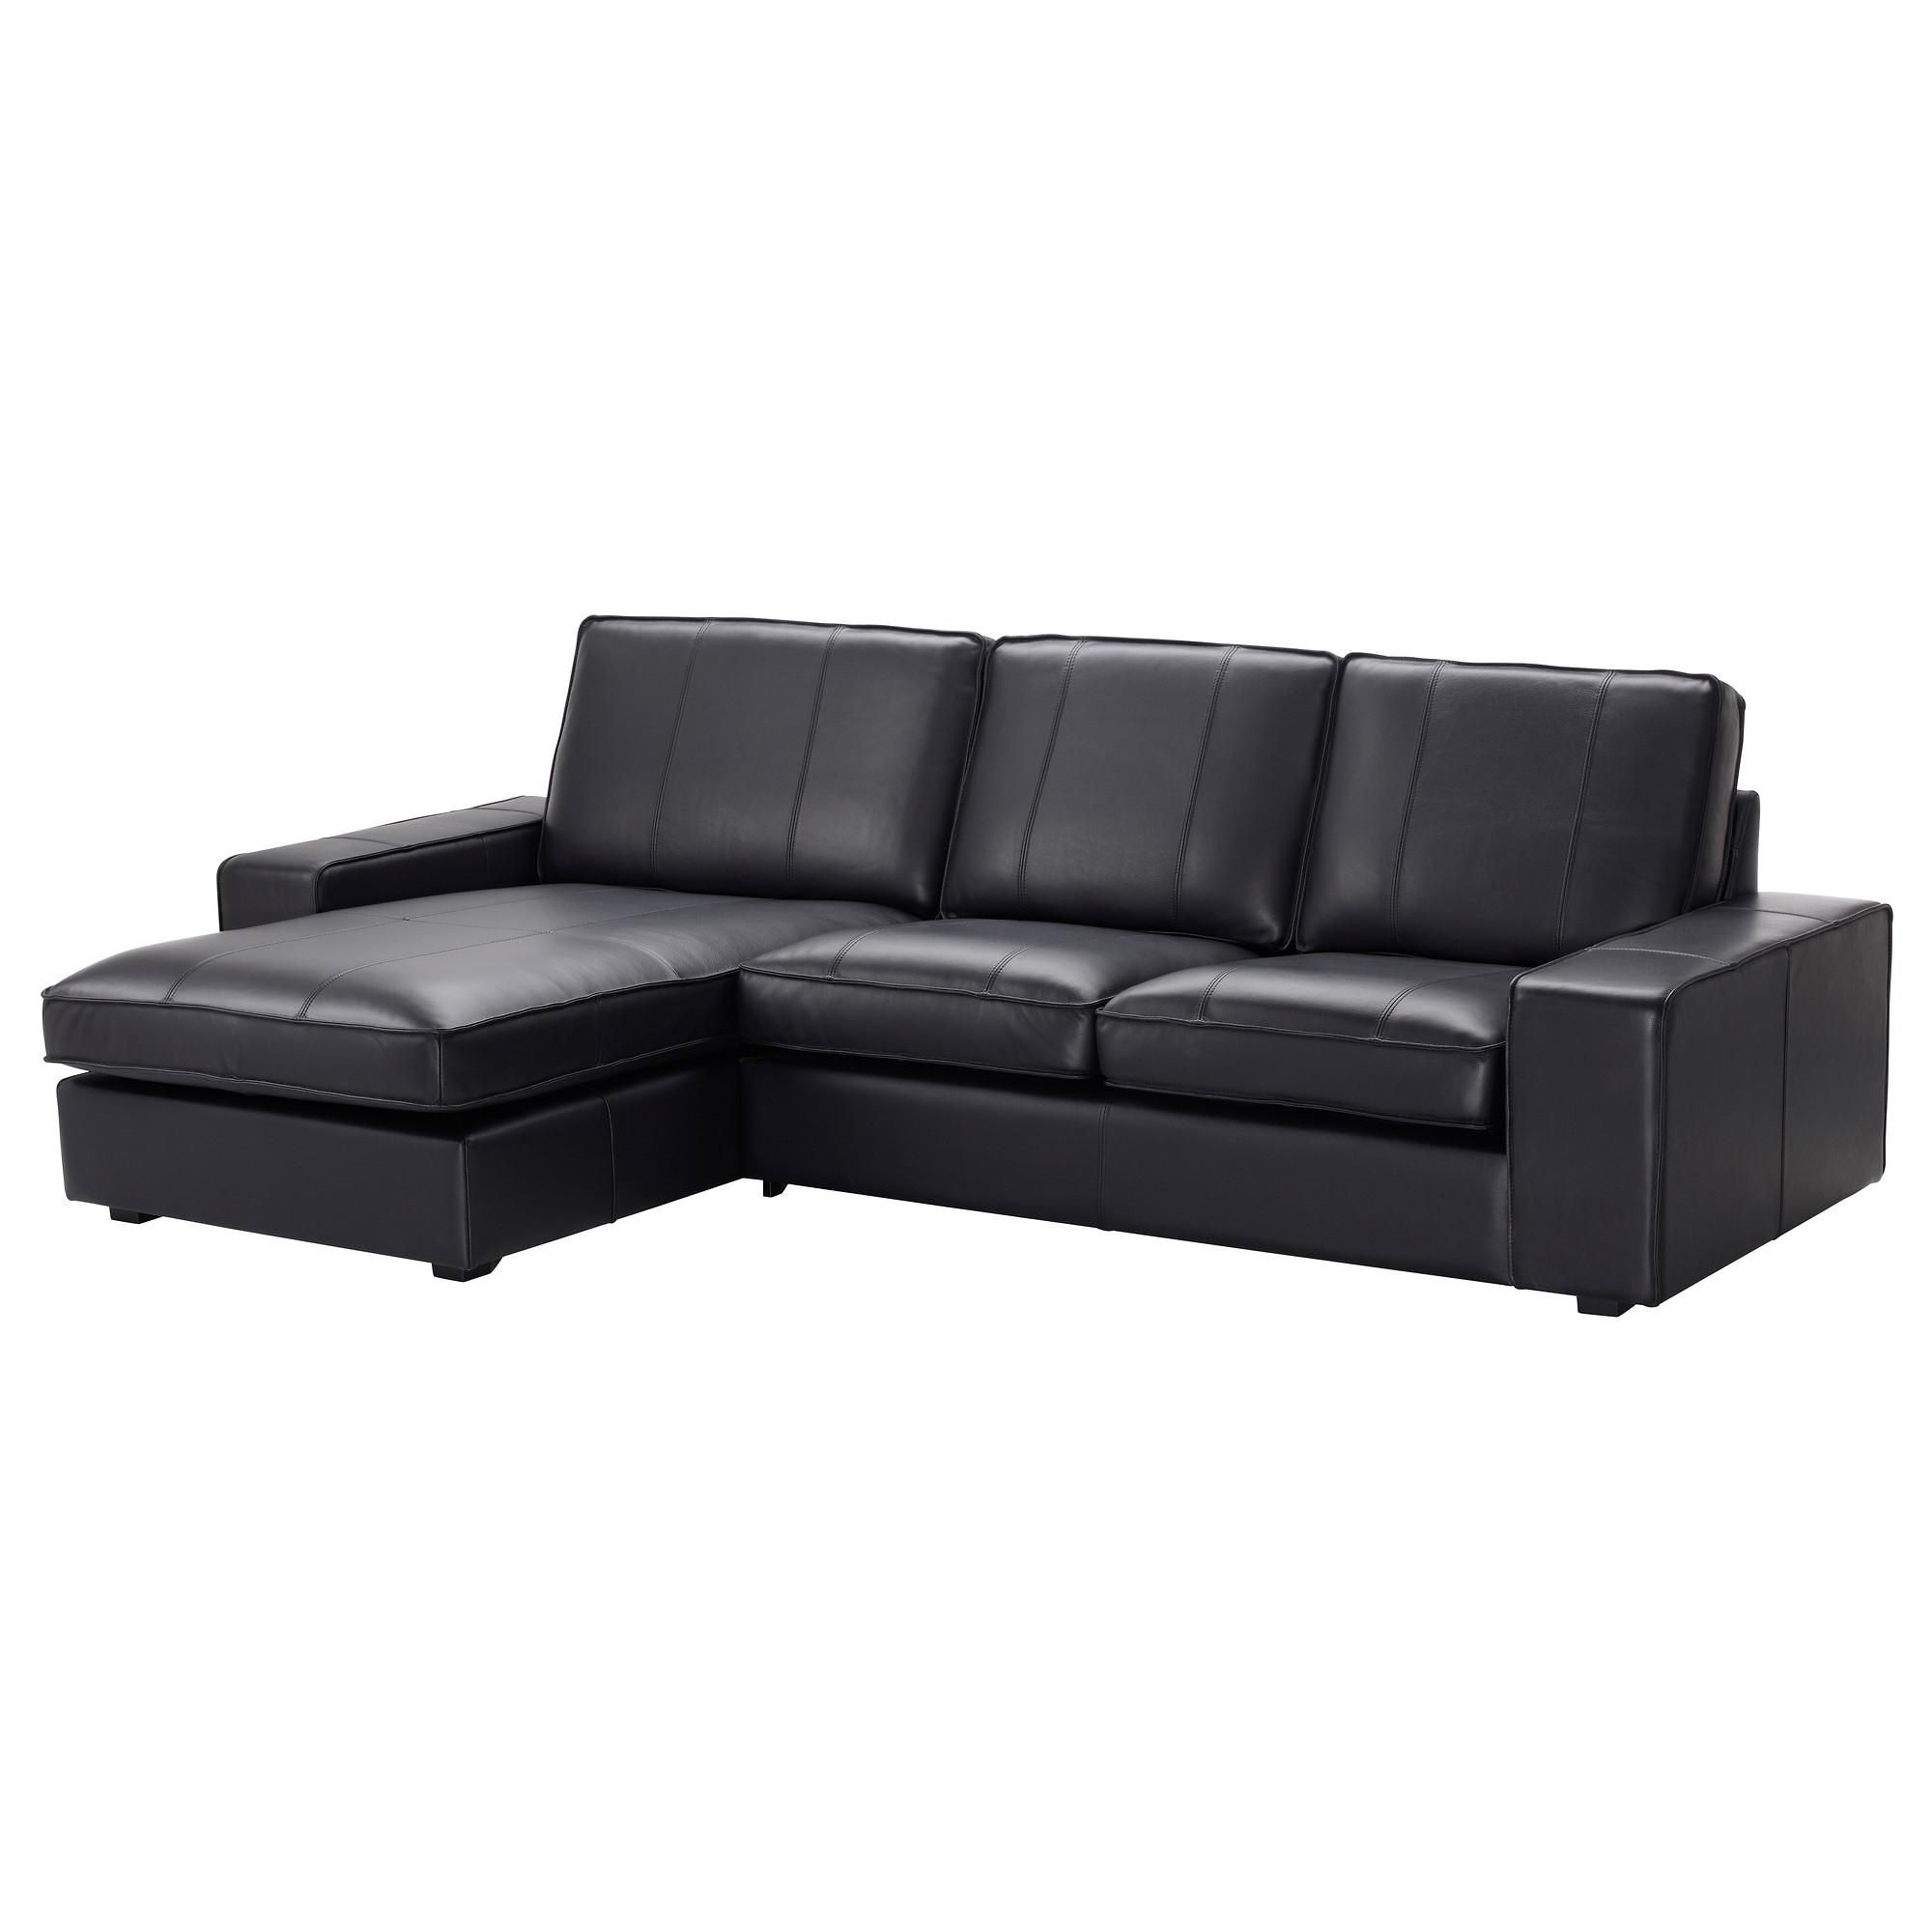 Leather & Faux Leather Couches, Chairs & Ottomans – Ikea Regarding Black Leather Chaise Sofas (View 7 of 20)